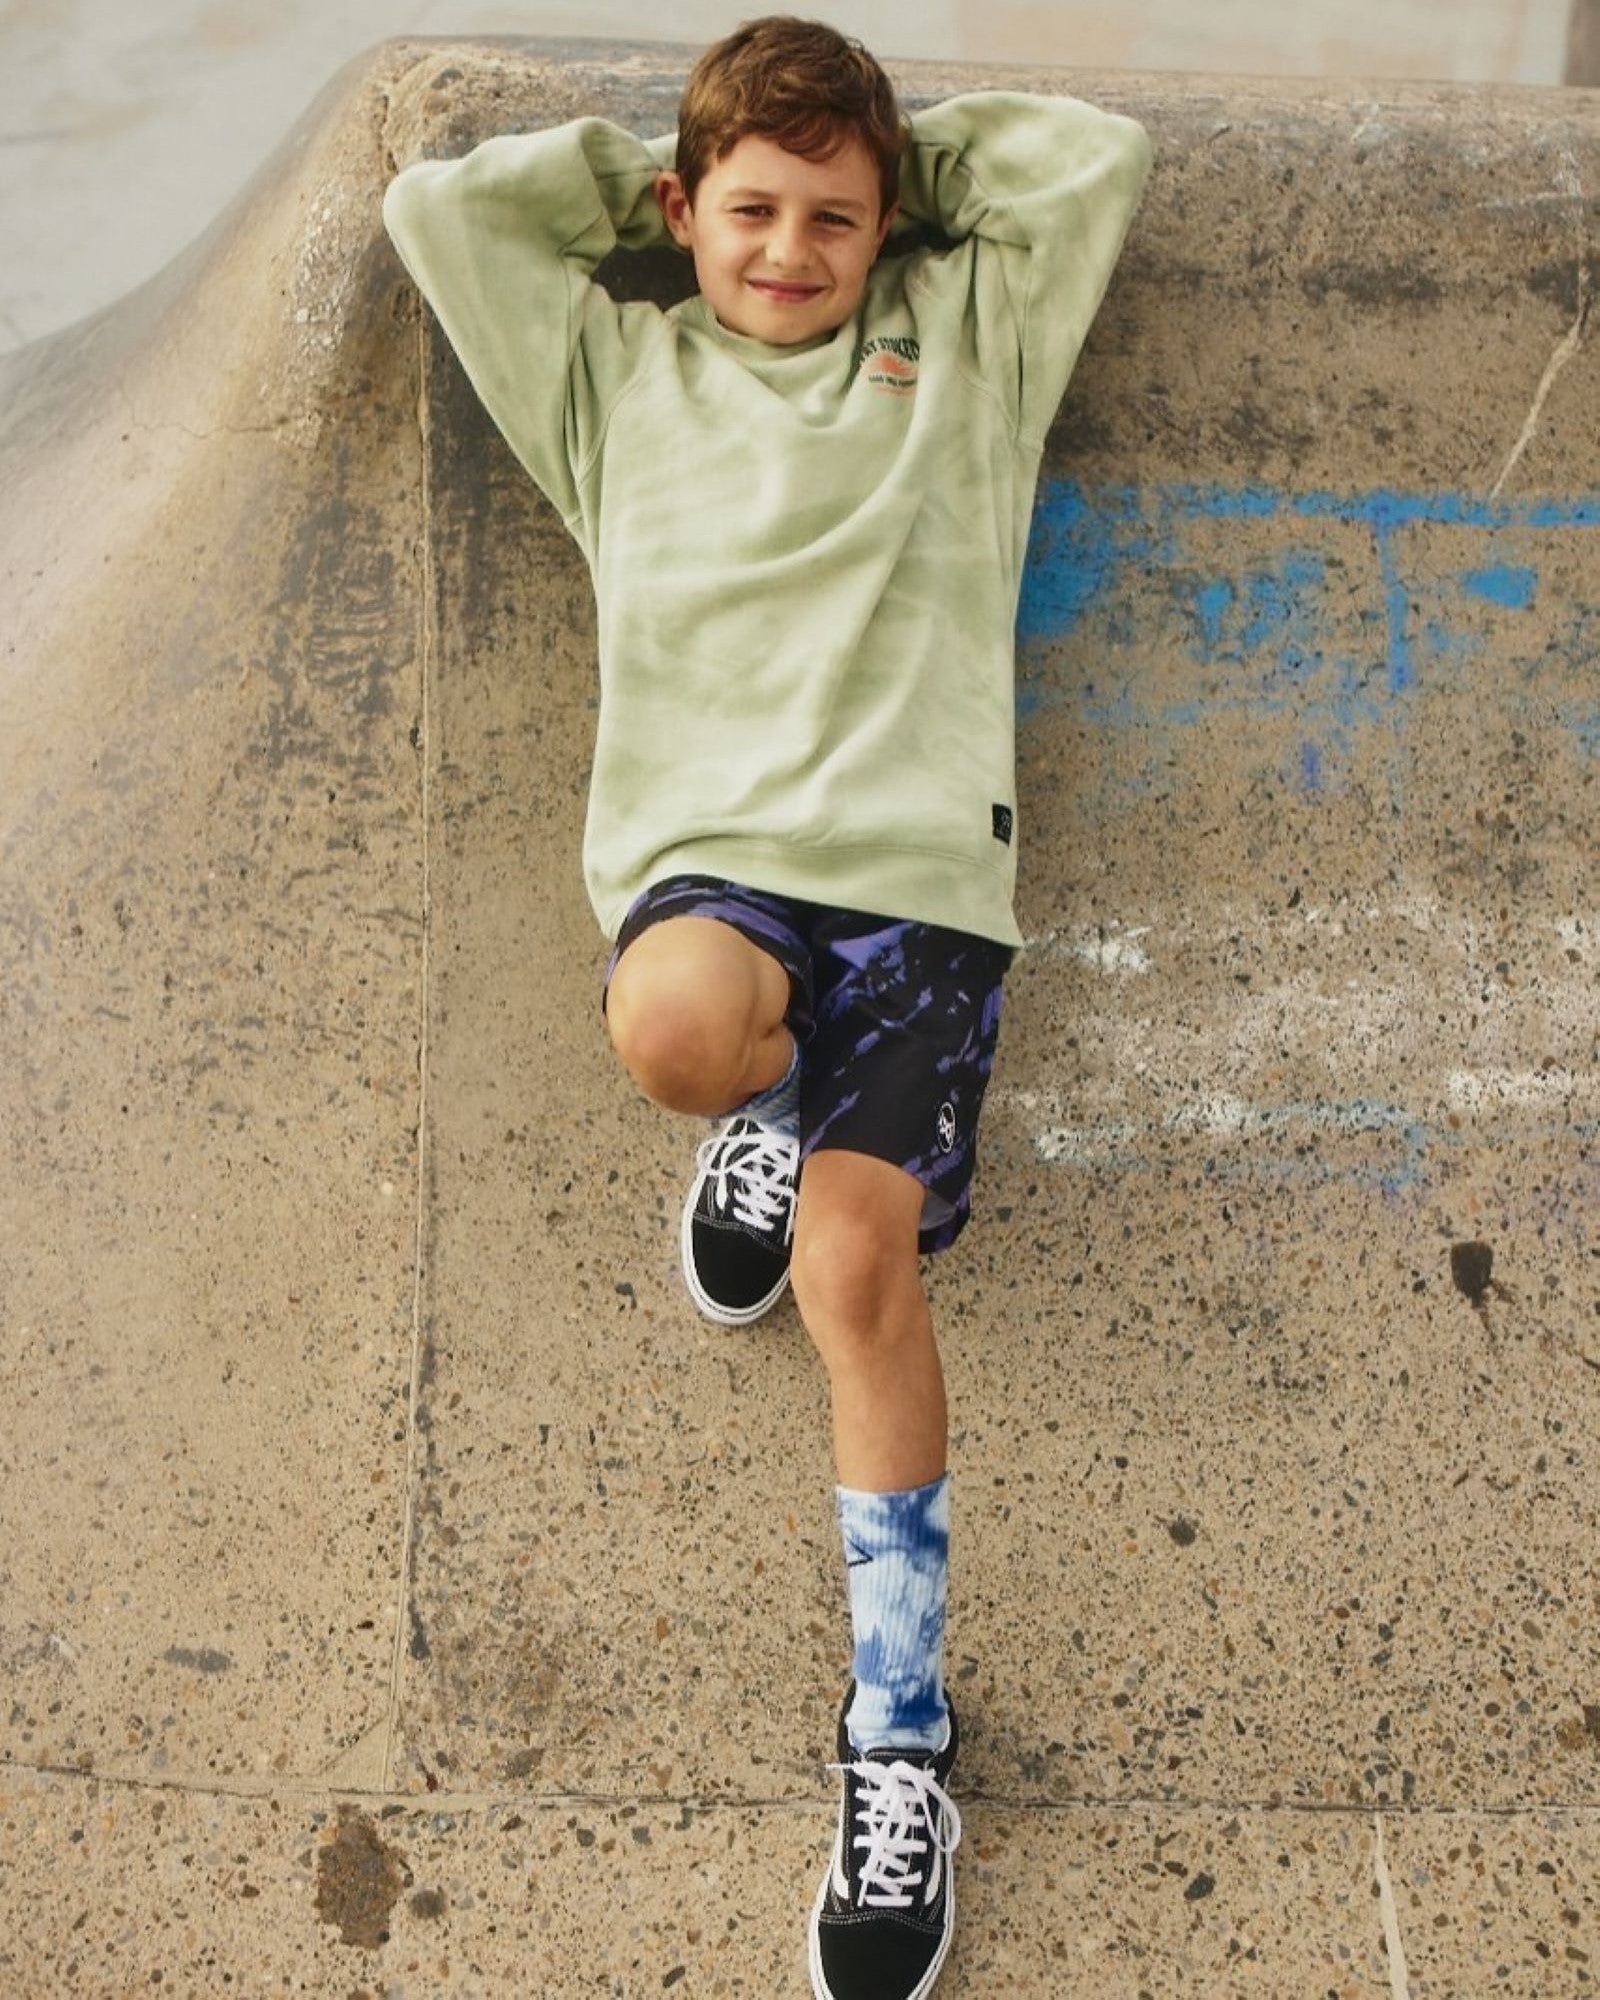 Kids Riptide Boardshorts by Alphabet Soup for boys aged 2-7. Feature an elastic waist, faux fly, diagonal tie purple and black dye, and bold logo patches.